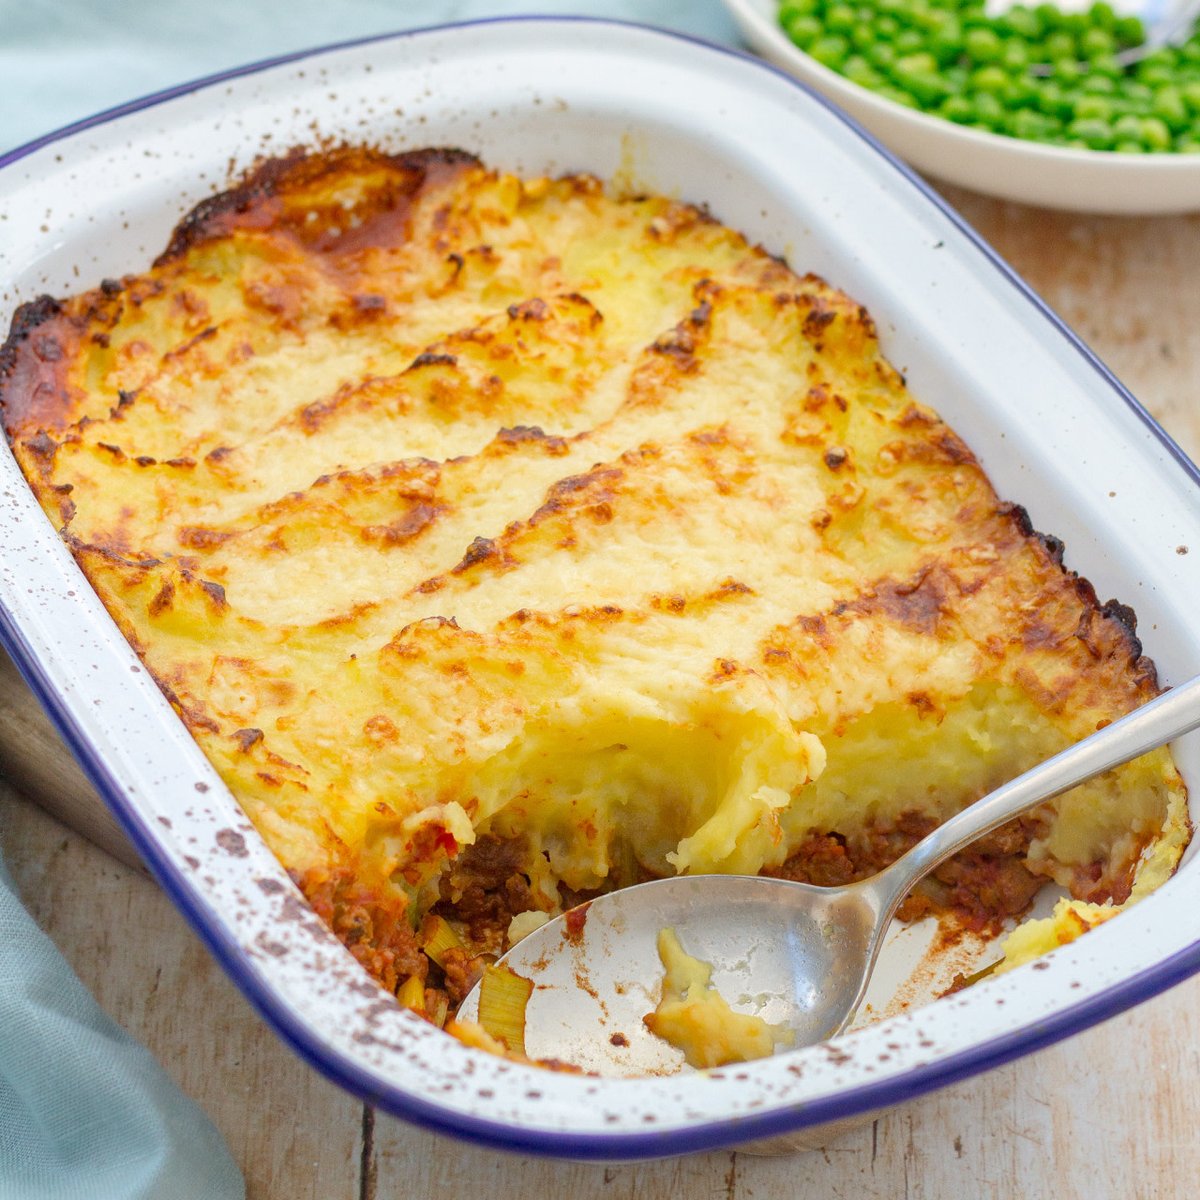 A family friendly classic with a twist, this Quorn Shepherd’s Pie uses #Quorn mince instead of the traditional lamb, meaning this version is #vegetarian and quicker to prepare – perfect for busy weeknights! bit.ly/2QicQcu?utm_ca… 

@quornuk @quornus #shepherdspie #quornmince